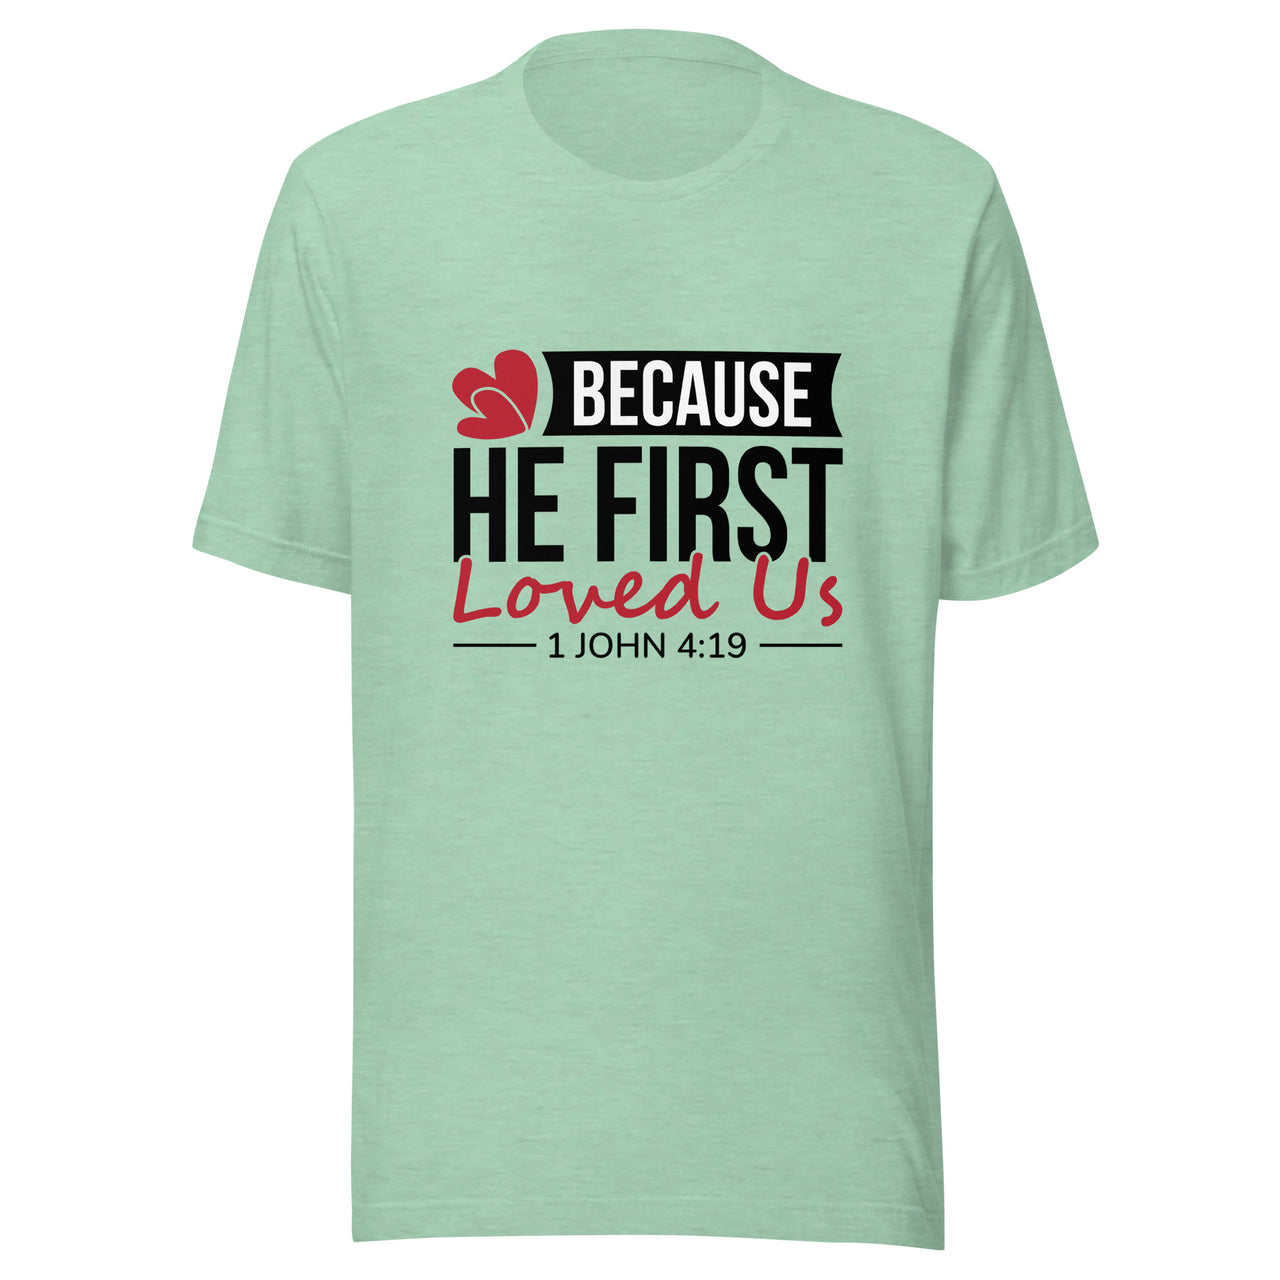 Because He First Loved Us [1 John 4:19]